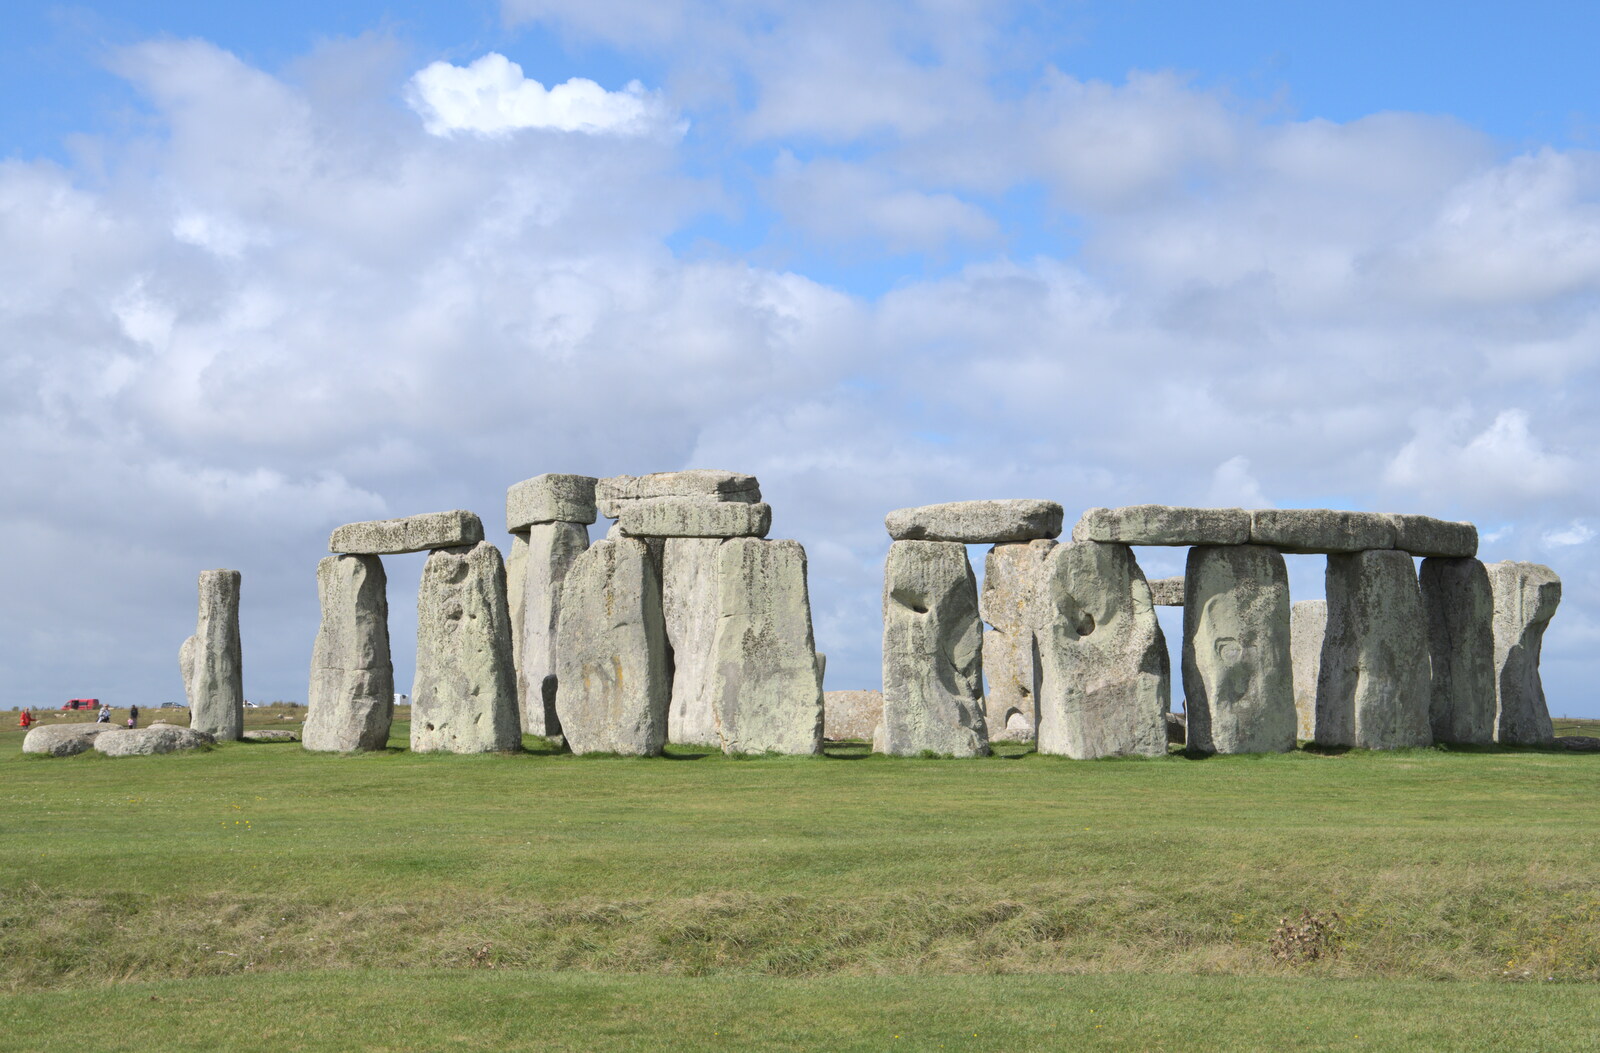 A view of Stonehenge from Stone Circles: Stonehenge and Avebury, Wiltshire - 22nd August 2020